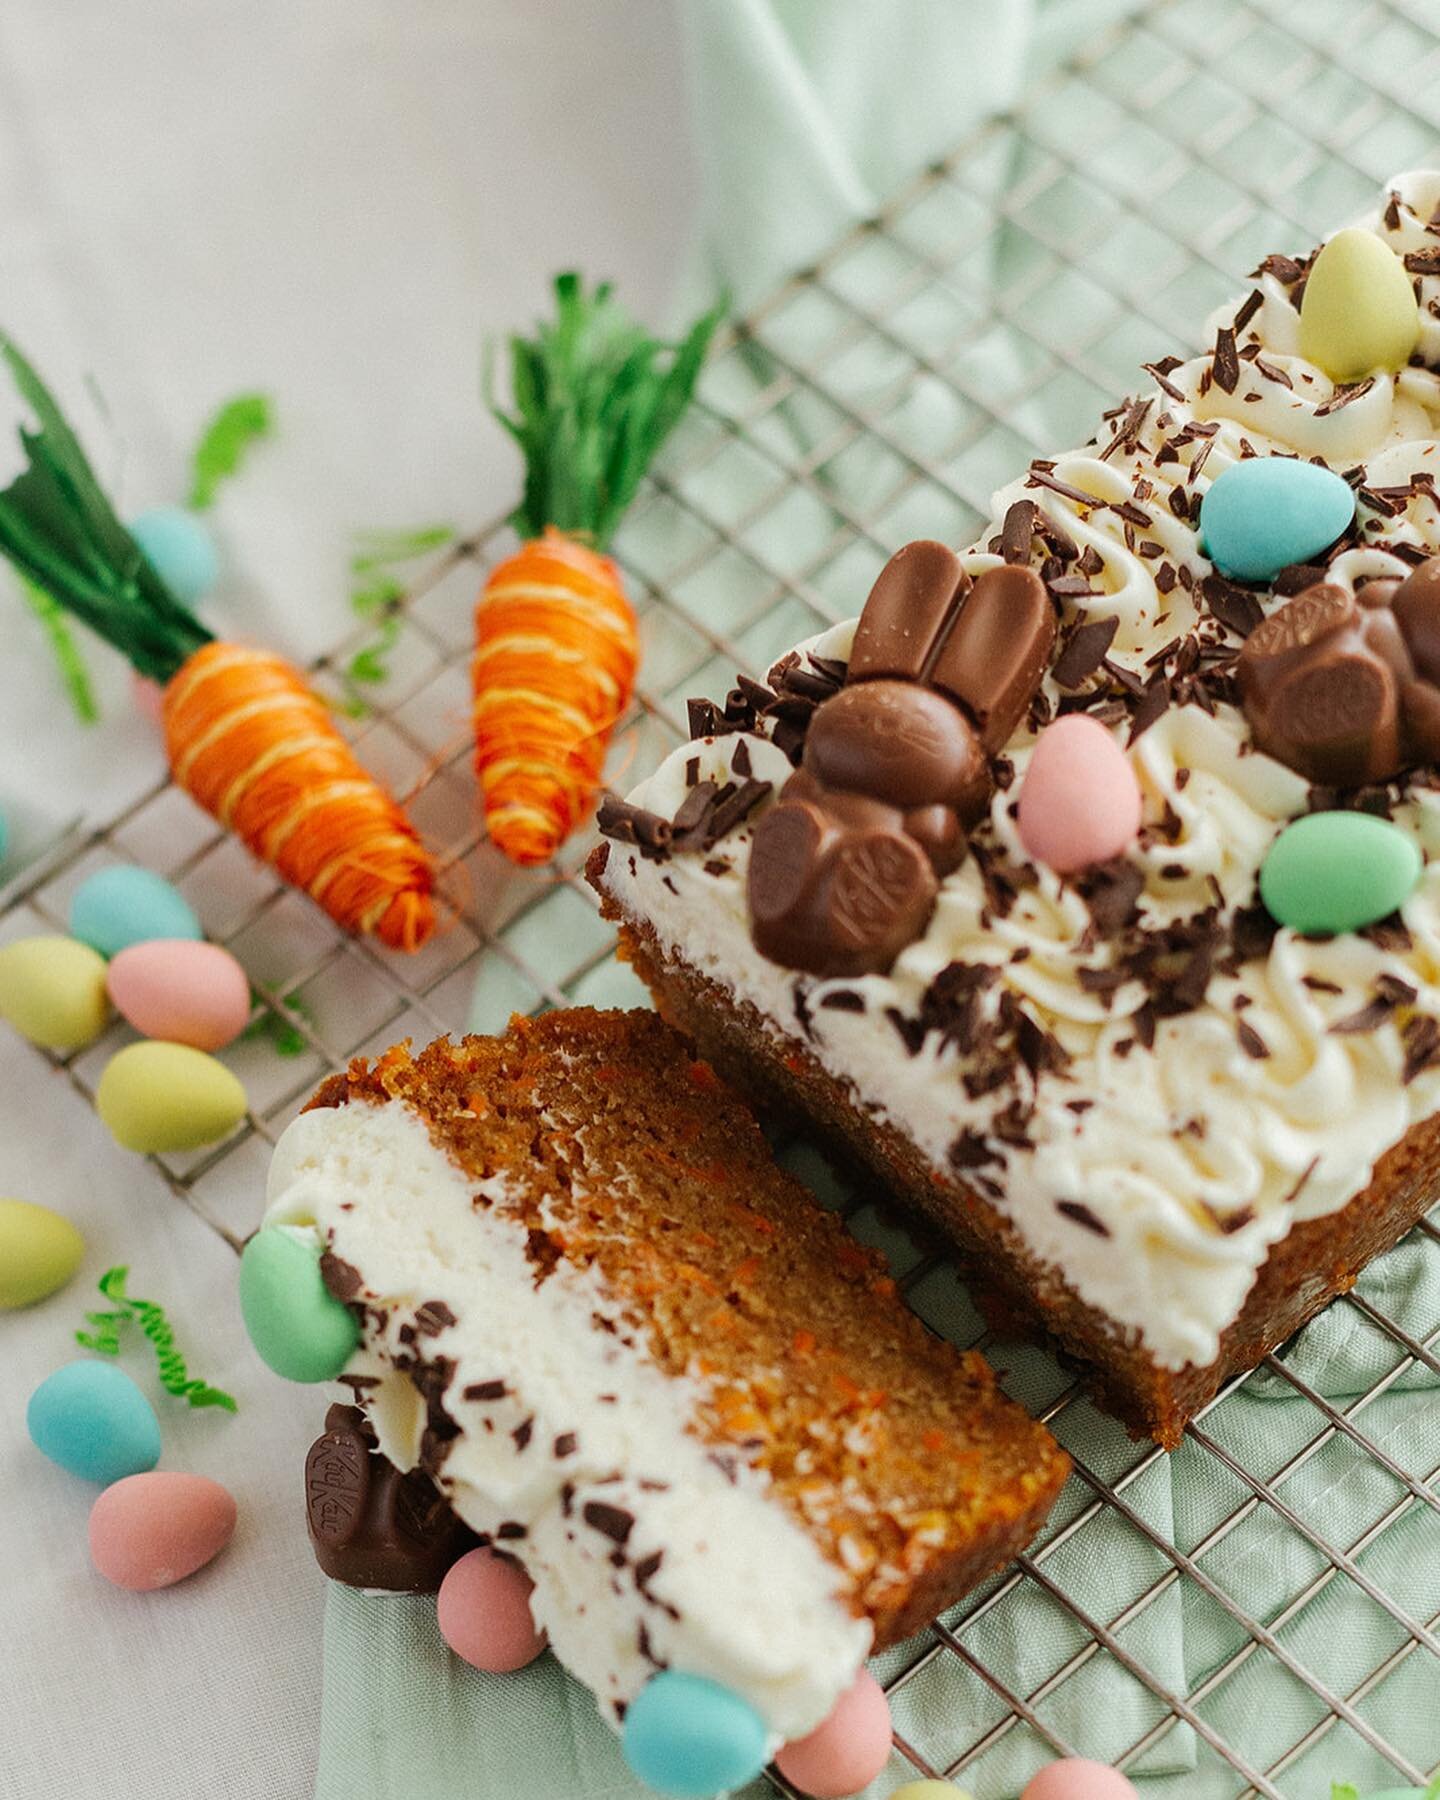 Our Easter Menu is now available for pre-order!🐣

&bull; Easter Carrot Loaf - $25
&bull; Easter Treat Box - 2 Vanilla Easter Cupcakes, 2 Chocolate Dipped Strawberries, and 2 Large Mini Egg Cookies&nbsp;&nbsp;- $20
&bull; Easter Cookie Box - $15
&bul